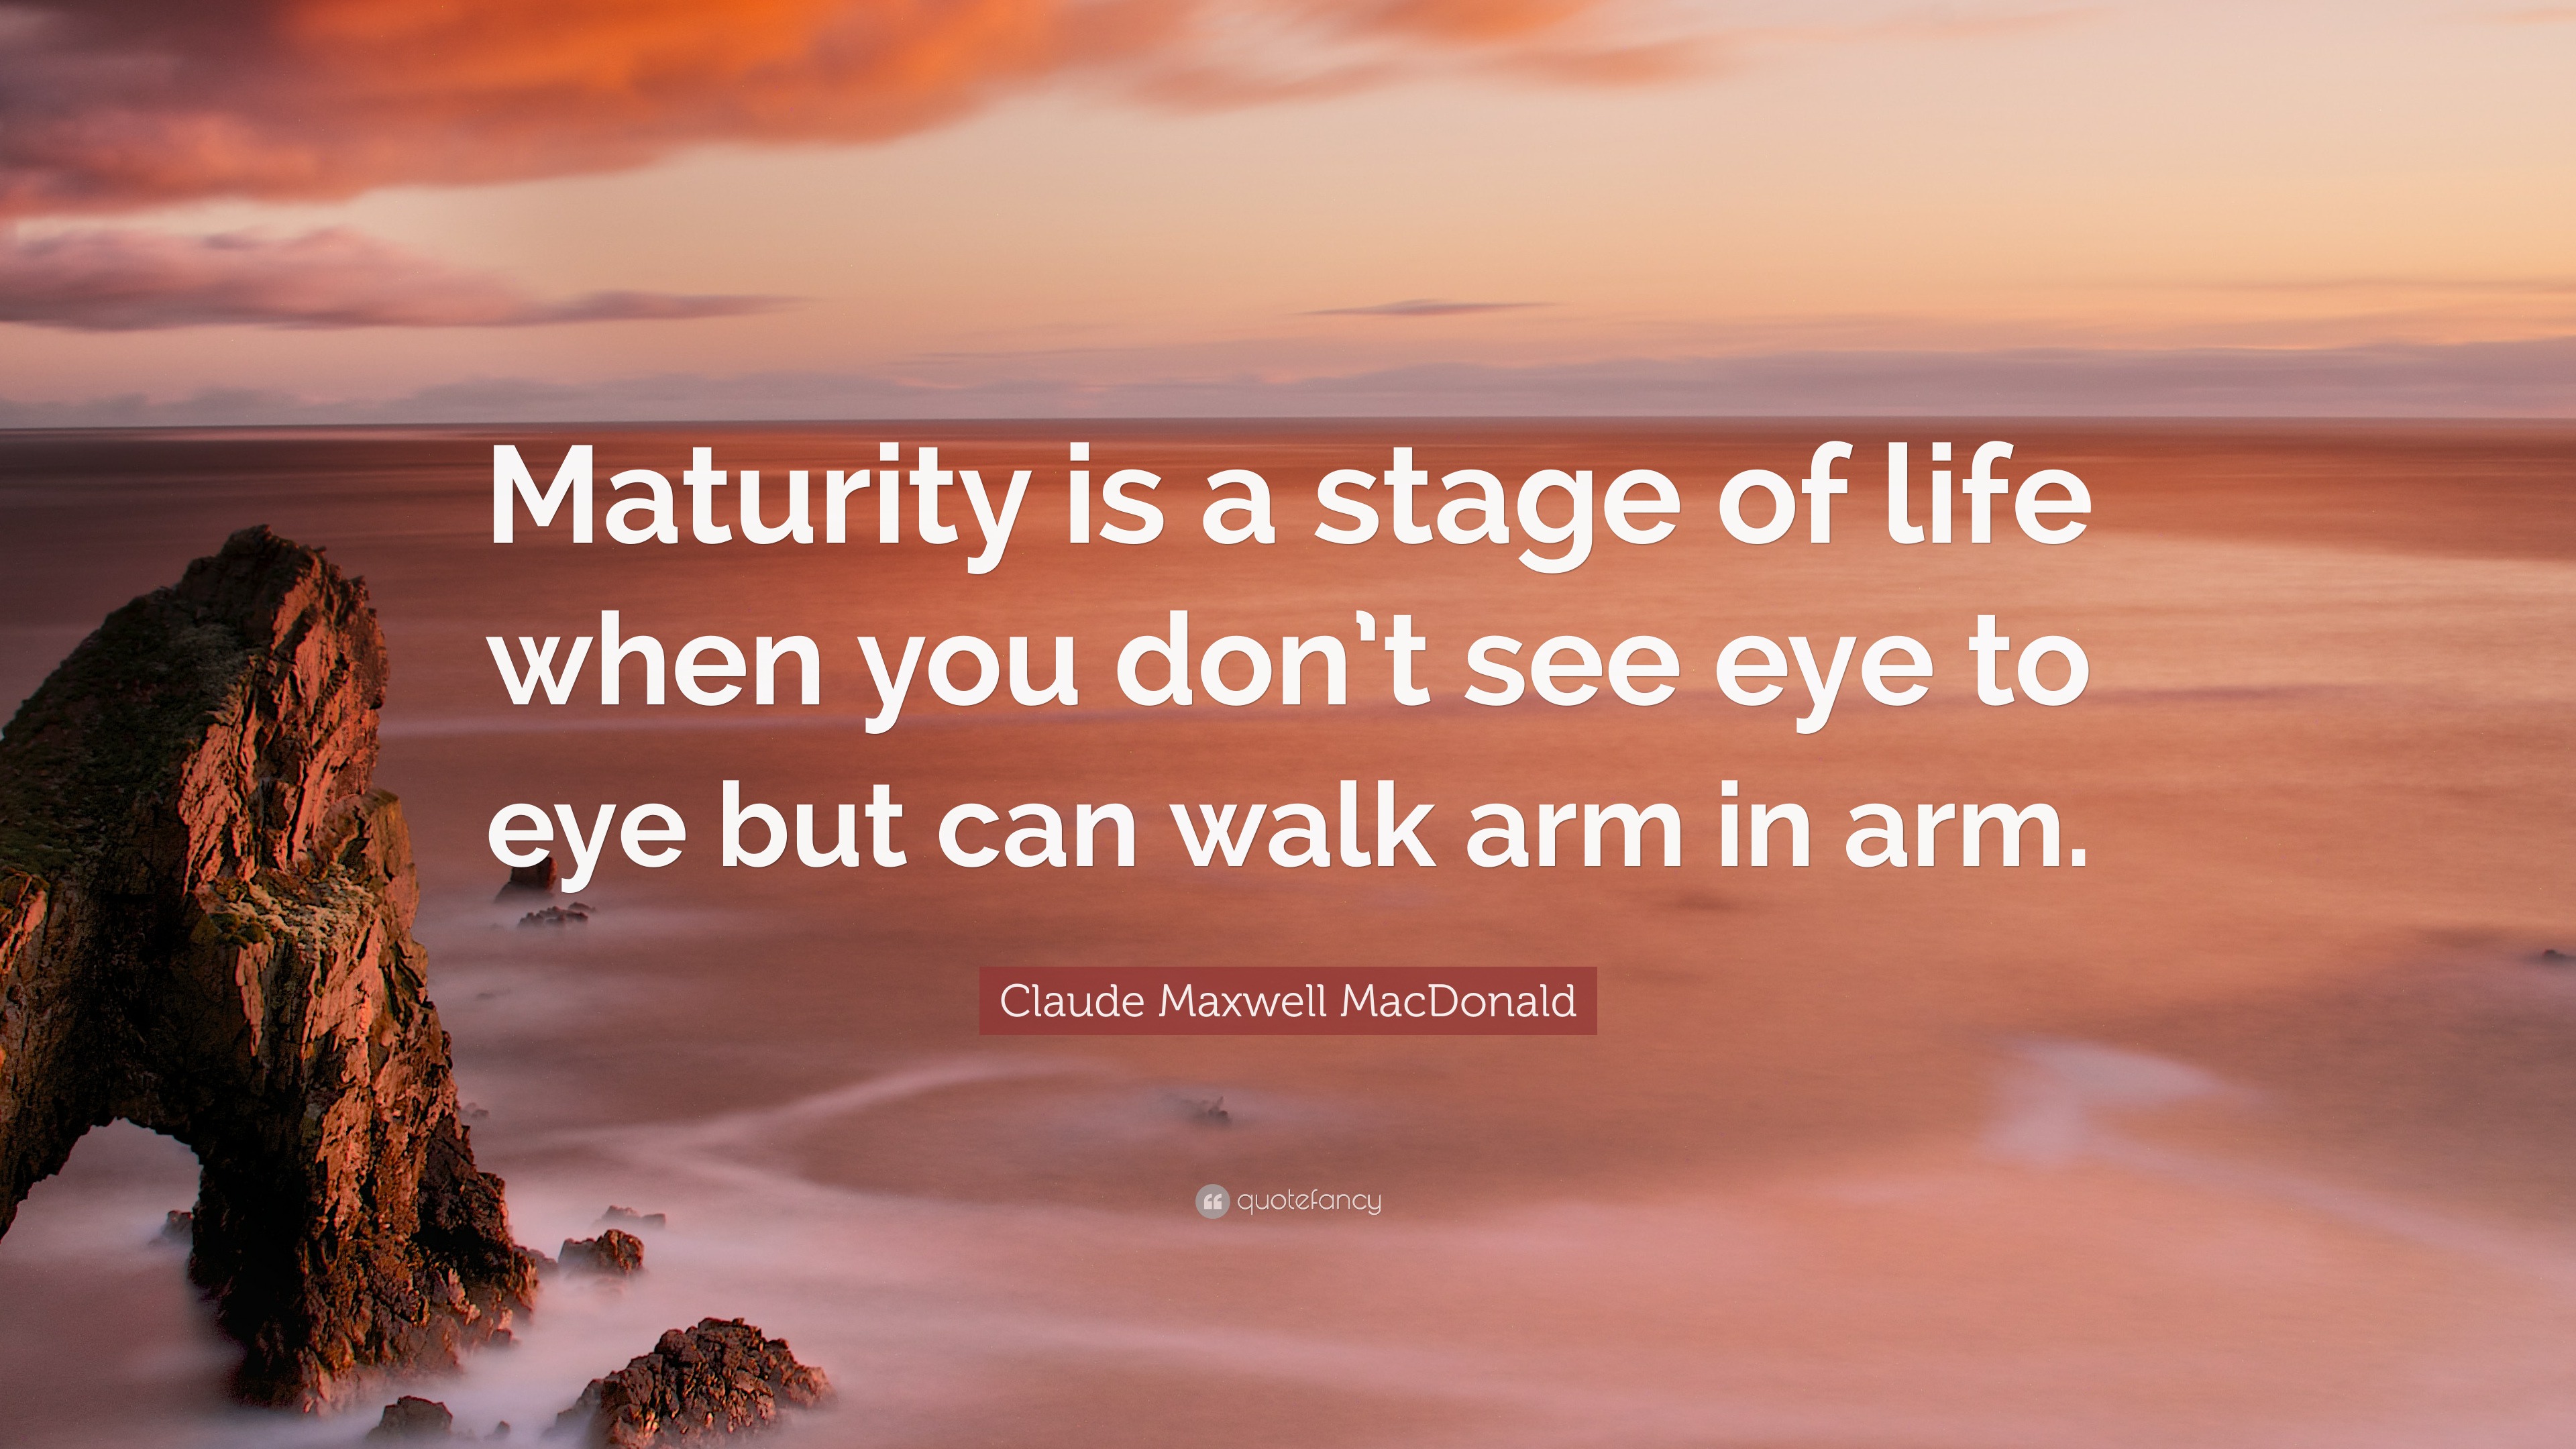 Claude Maxwell MacDonald Quote “Maturity is a stage of